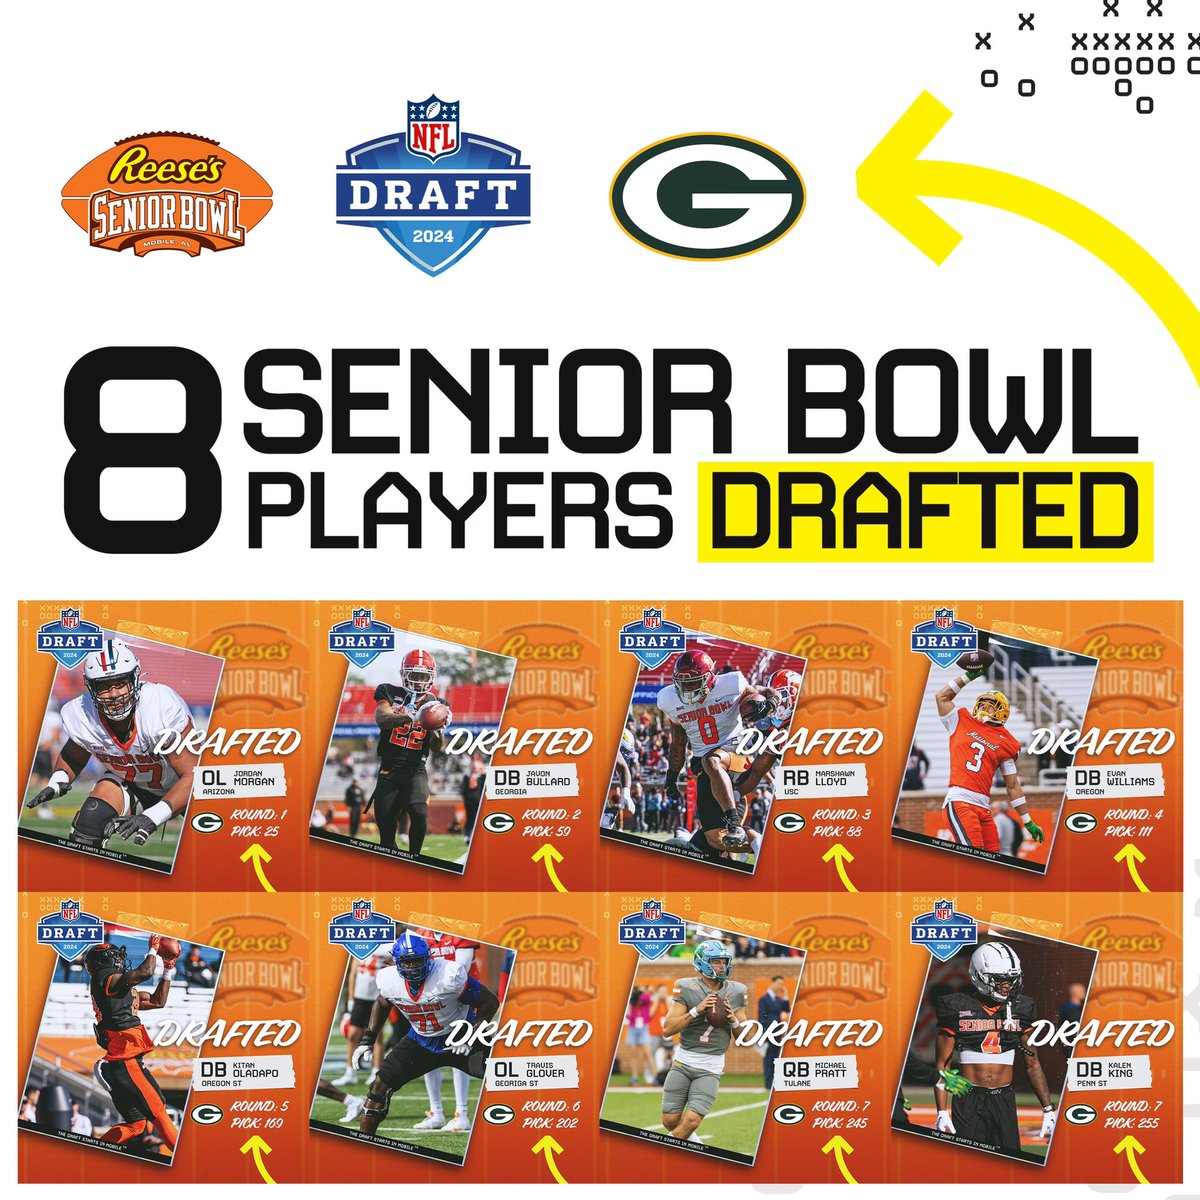 Here's what #GoPackGo fans can expect from @seniorbowl rookies (prepare to scroll with 8 draft picks!); 🧀 T/G Jordan Morgan (Round 1, Pick 25)- Slam-dunk left tackle athlete jumps off tape. Has sweet feet, reactive mirror skills, & recovery quicks to compensate for lack of…